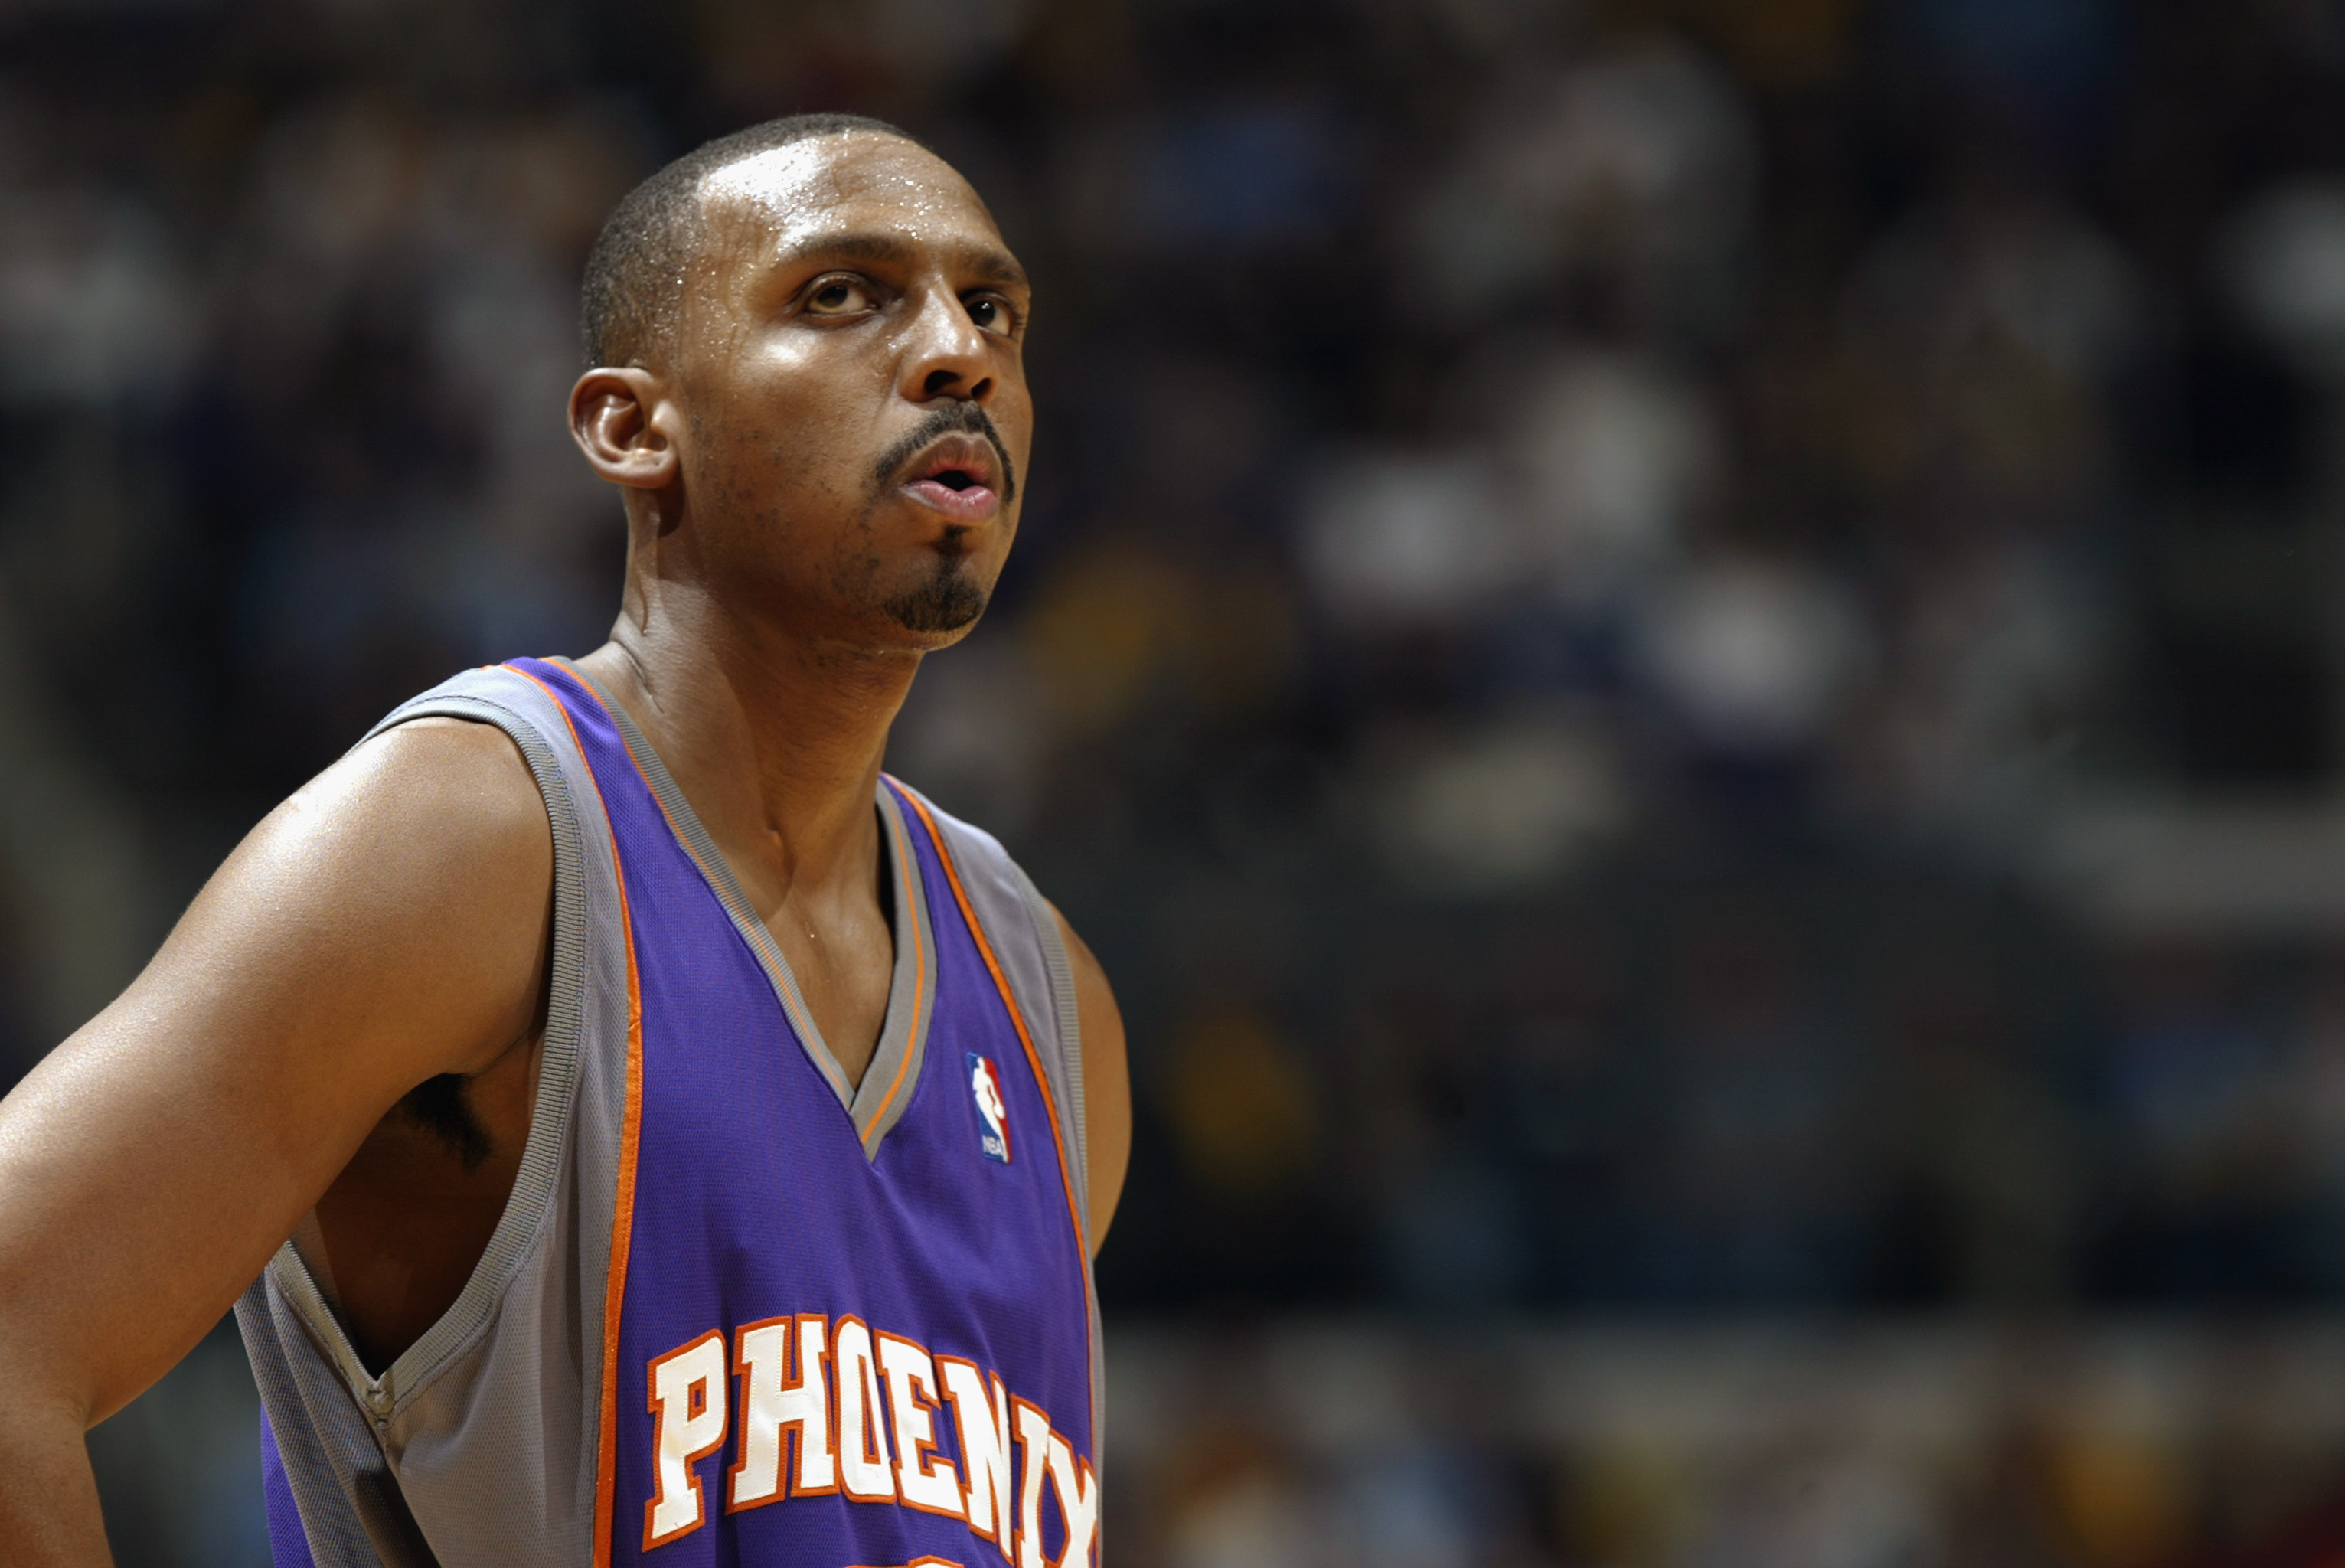 Former Phoenix Suns guard Penny Hardaway reacts during a game in January 2003